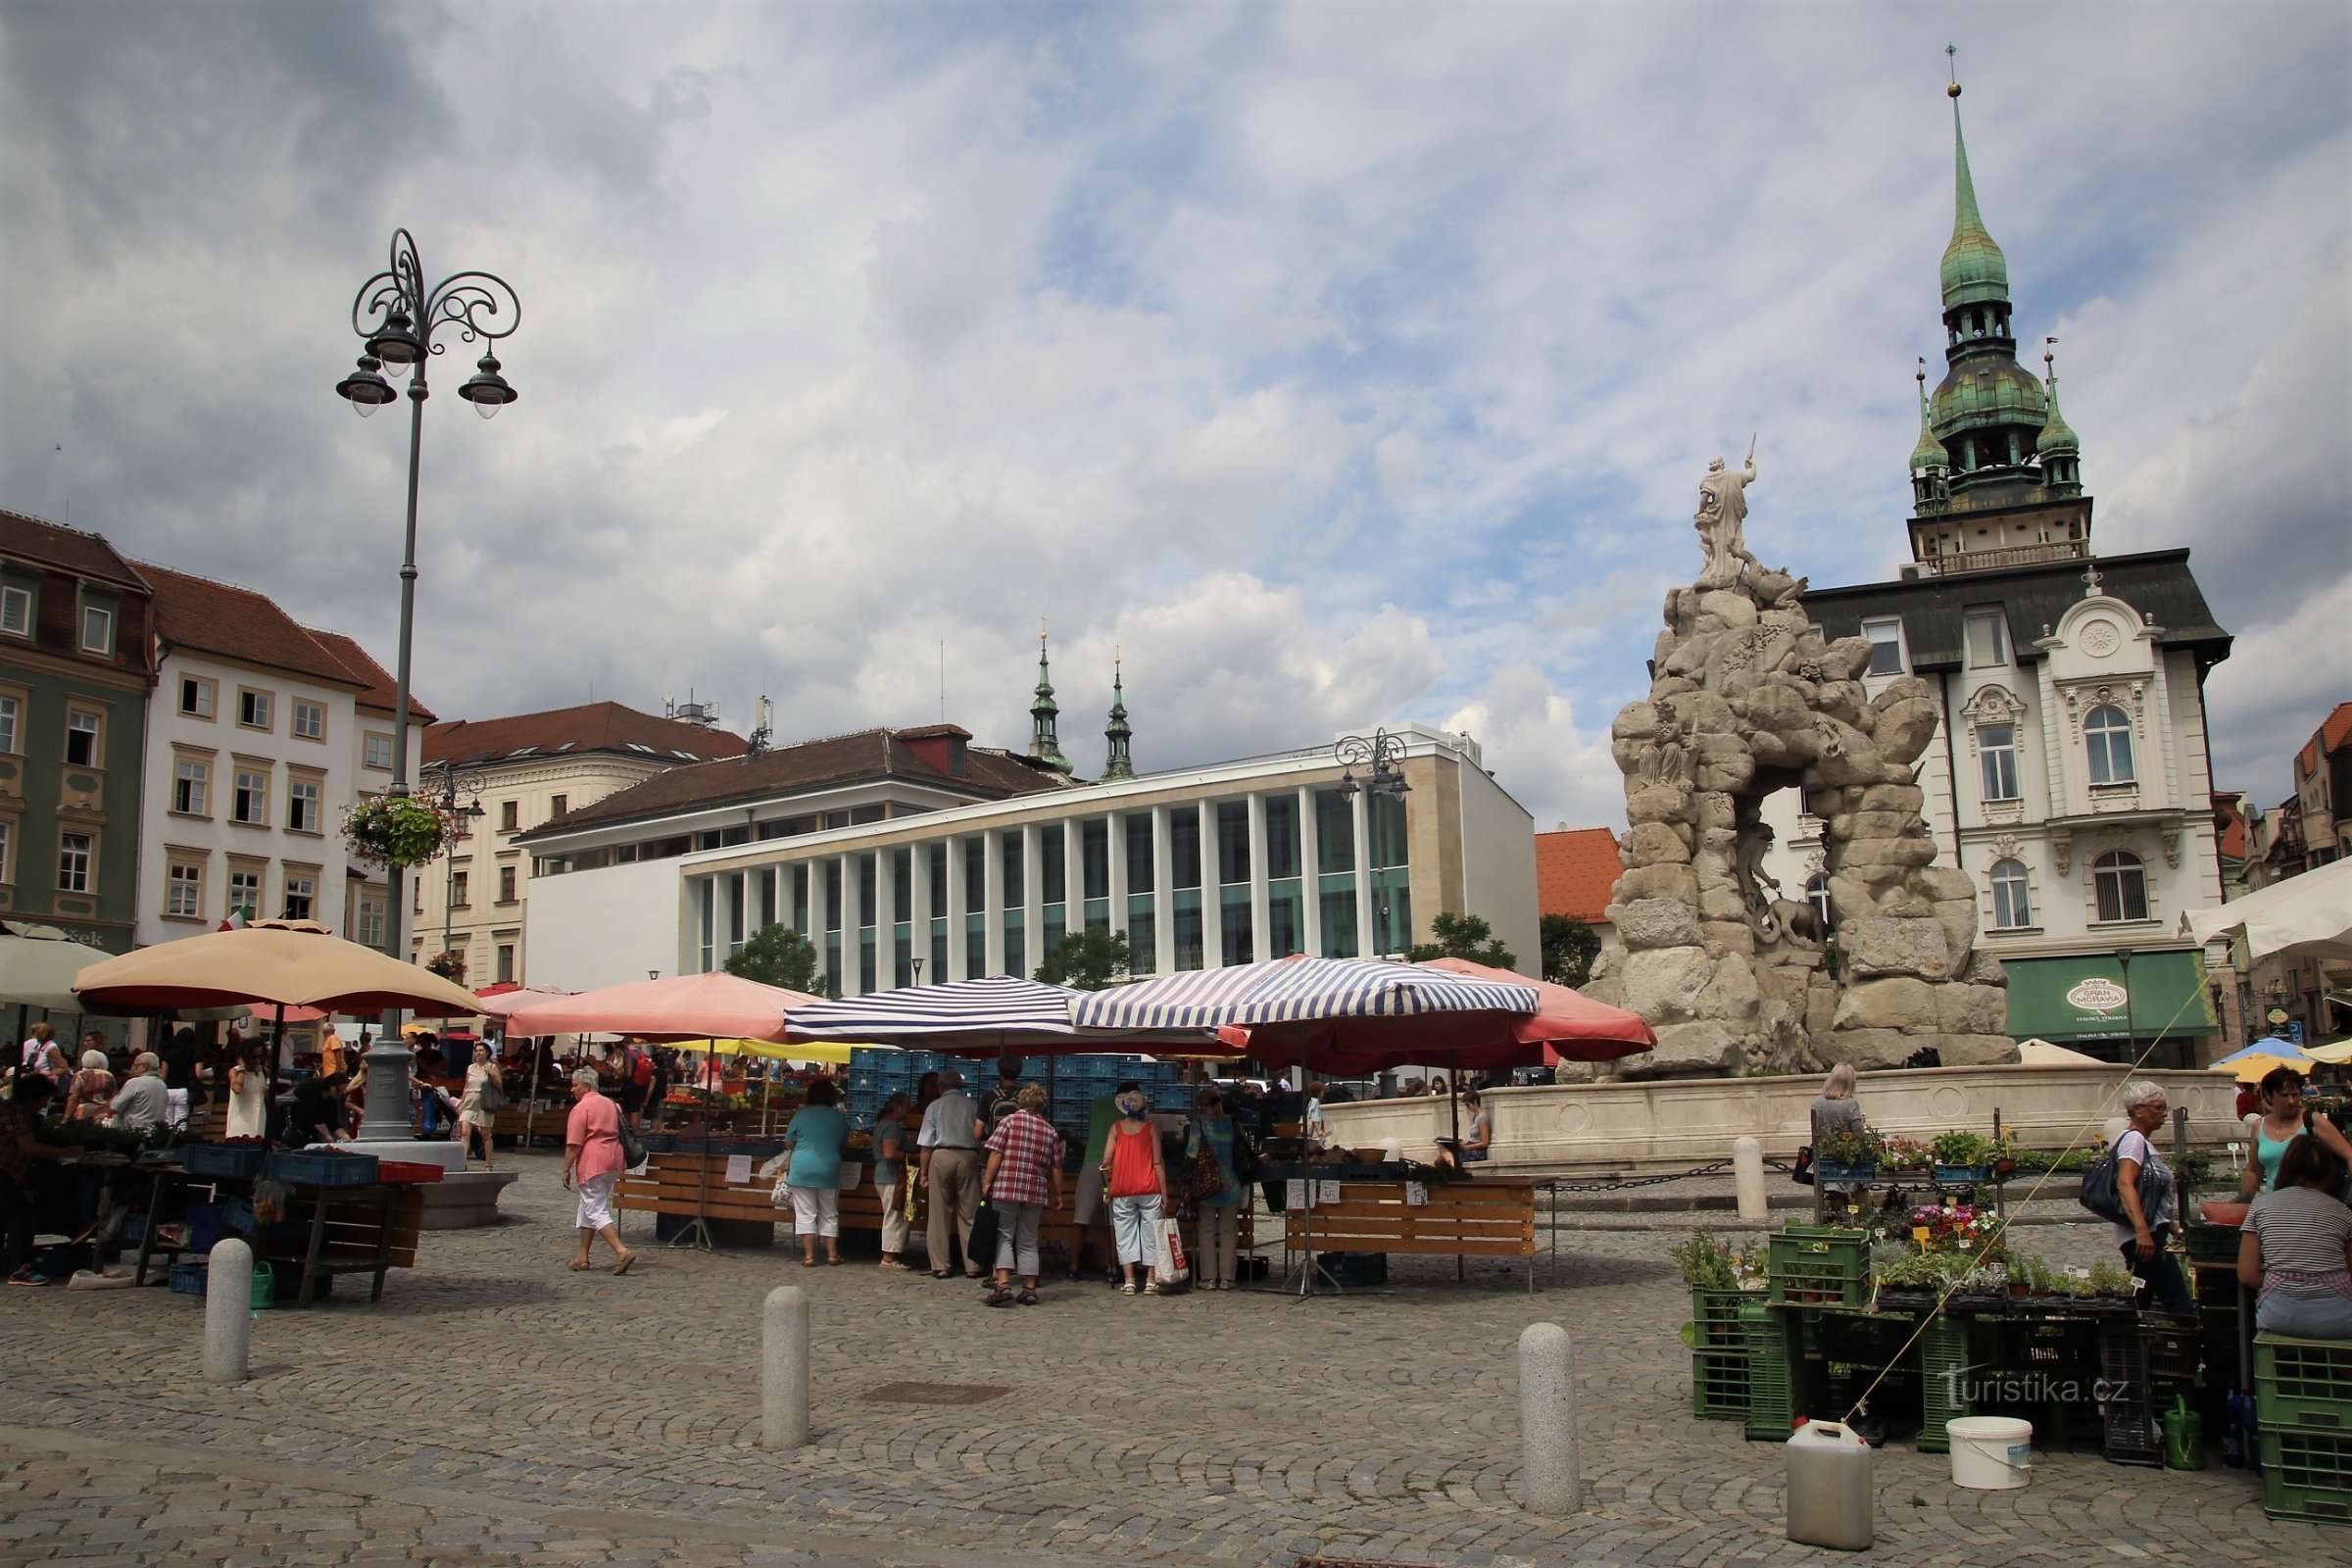 View of the building from Zelný trh square